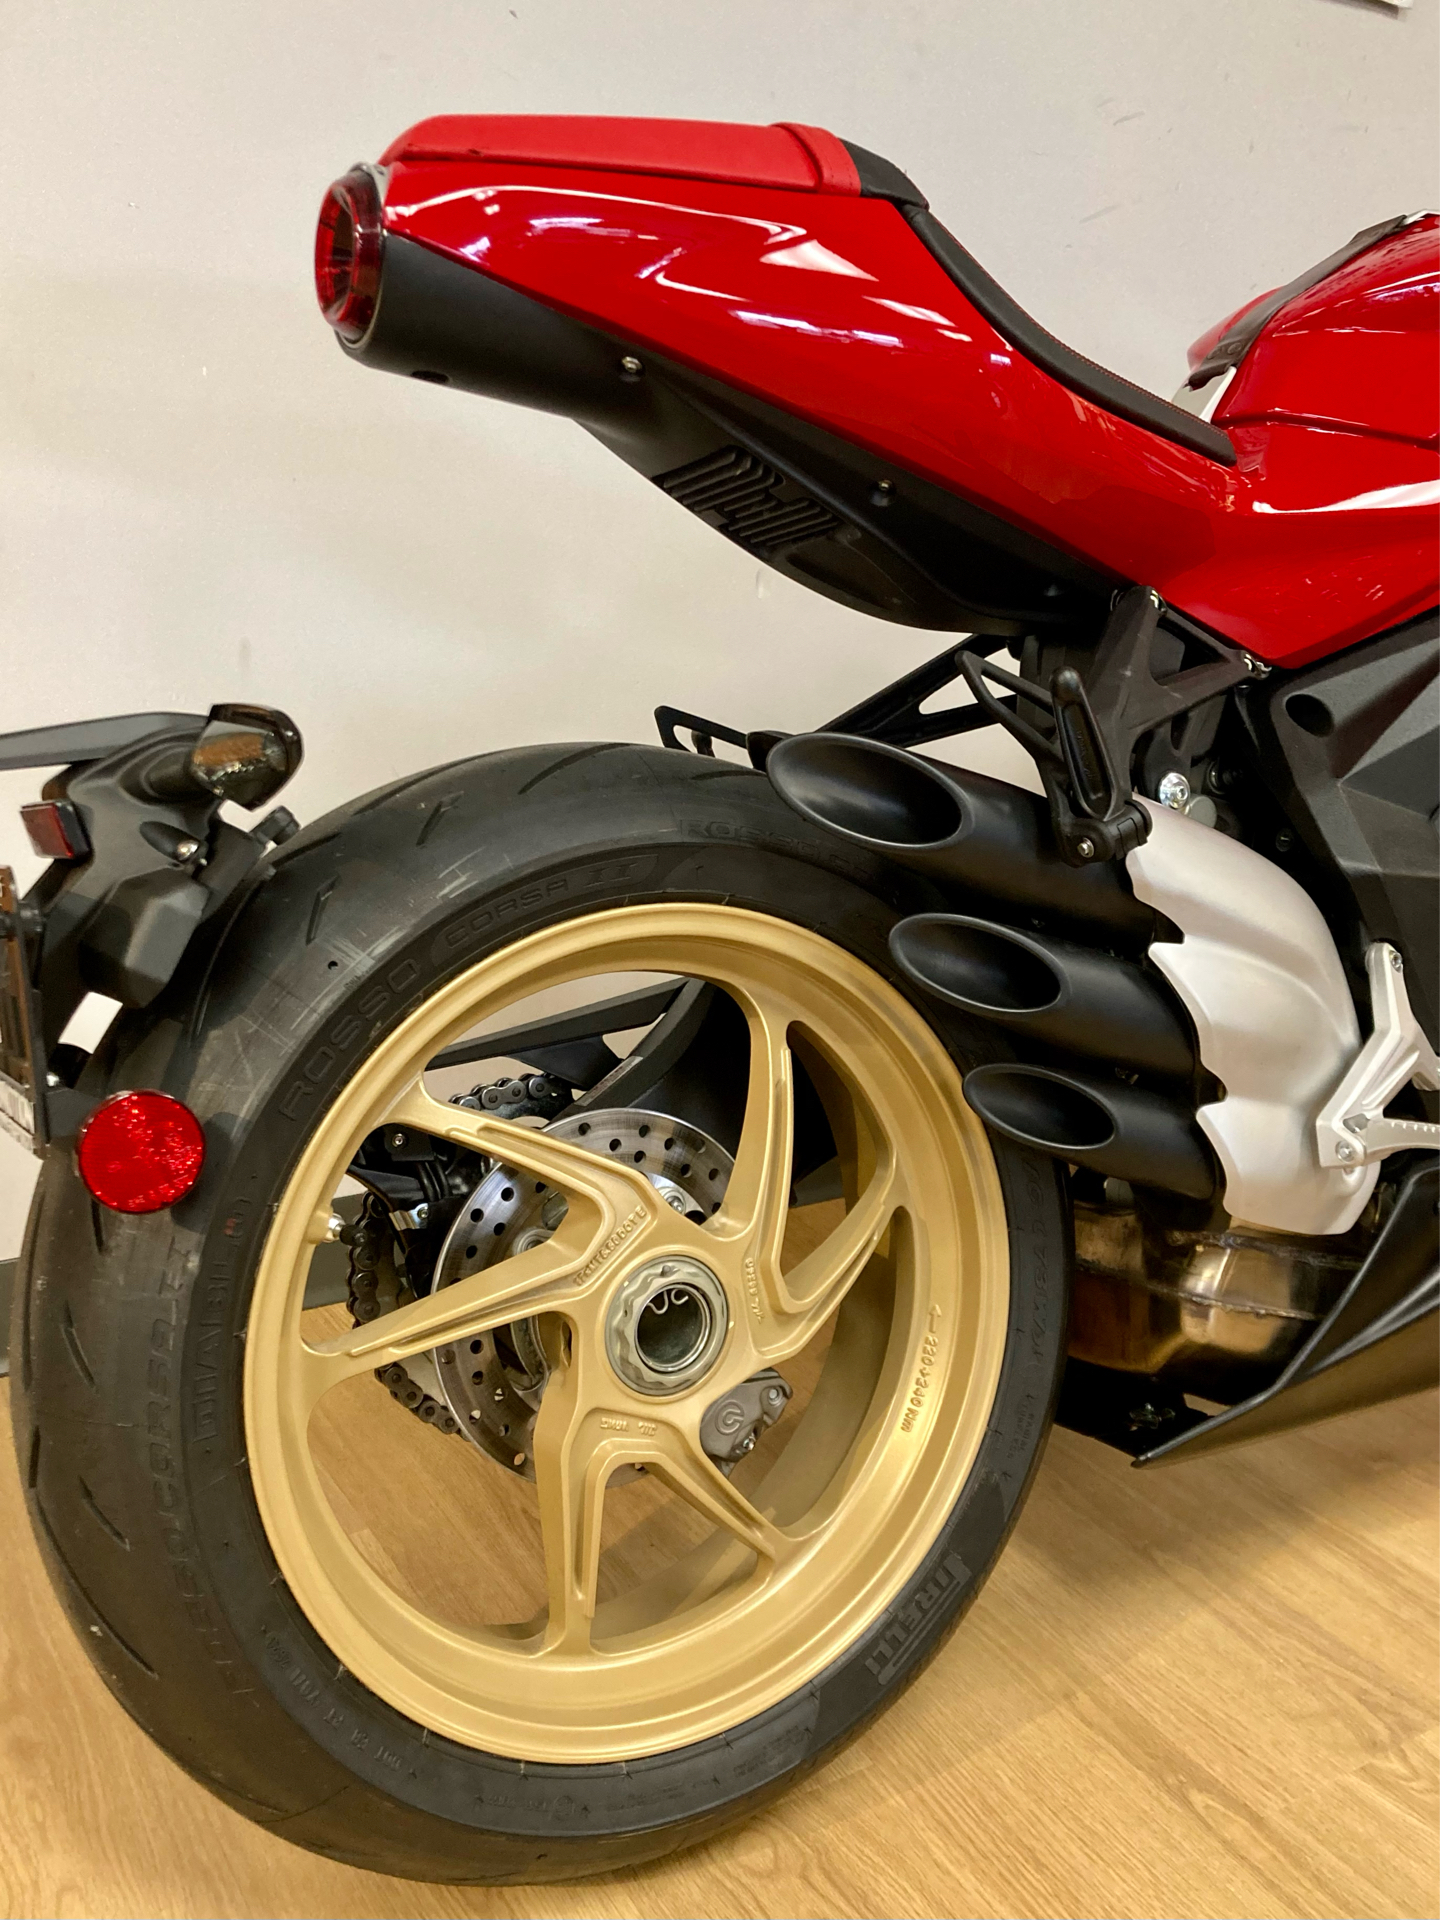 2021 MV Agusta Superveloce 800 in Mahwah, New Jersey - Photo 9